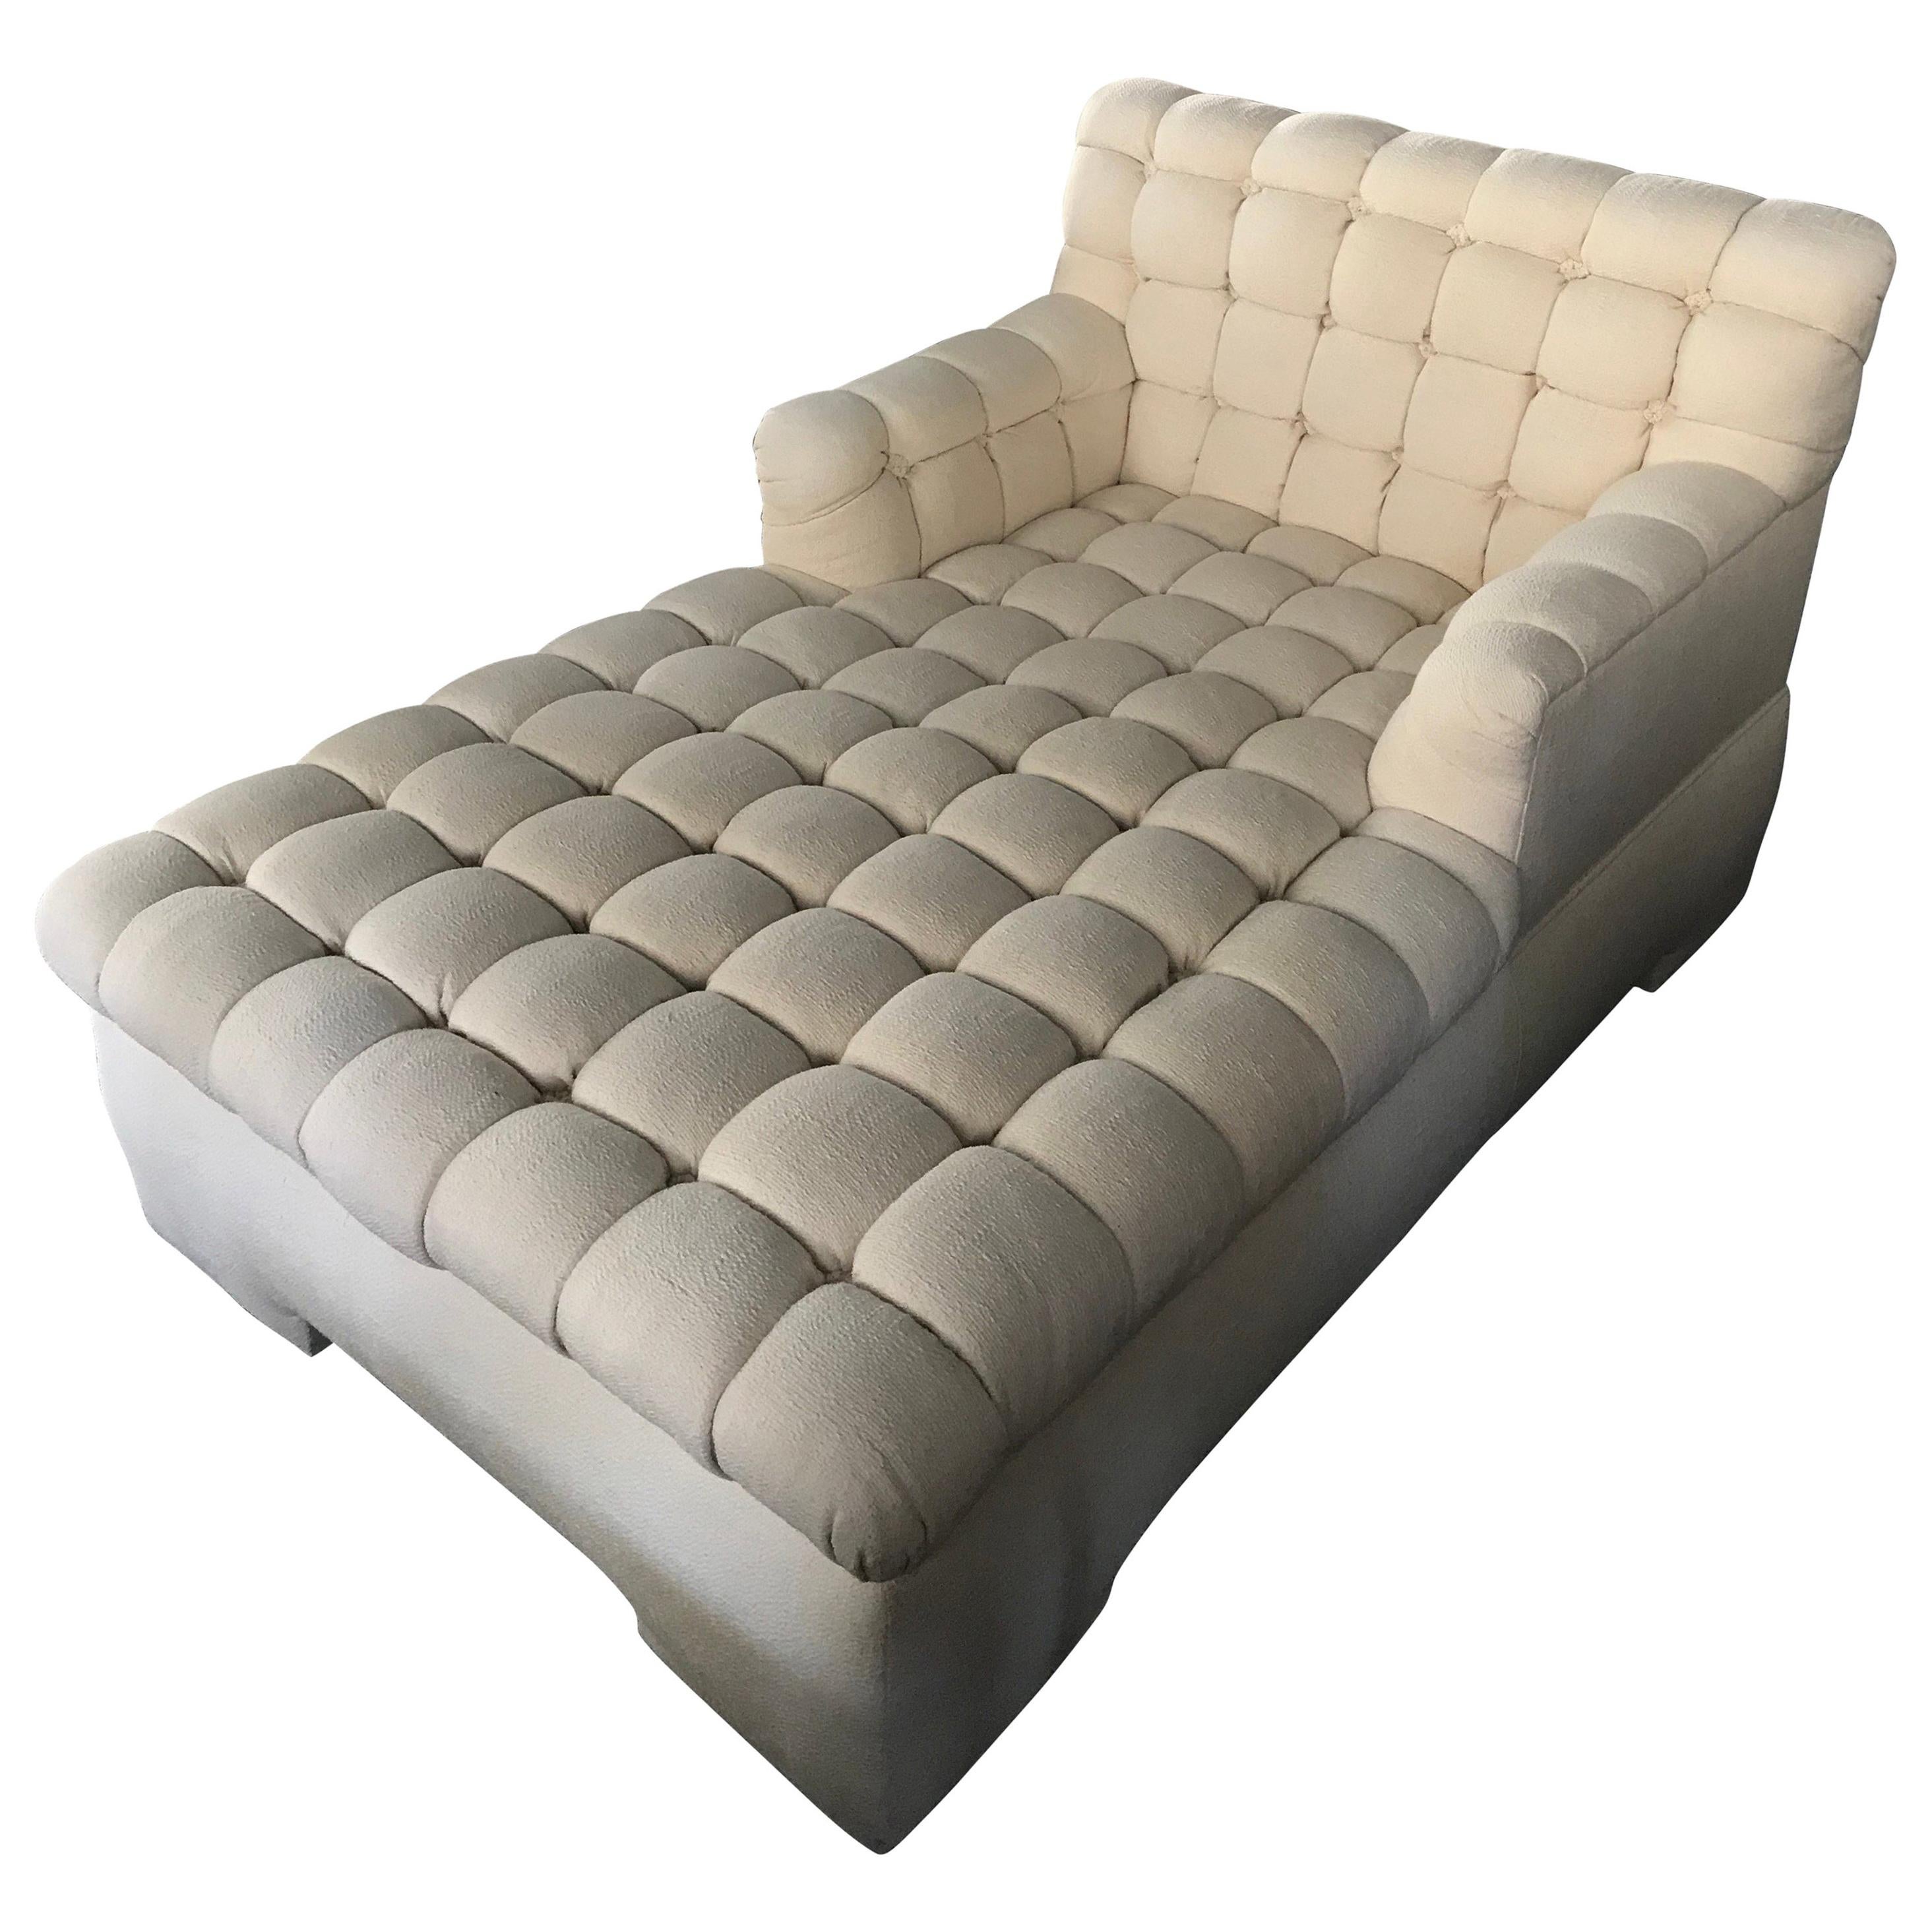 Steve Chase Marshmallow Tufted Chaise Lounge Crème Neutral Made by A. Rudin  at 1stDibs